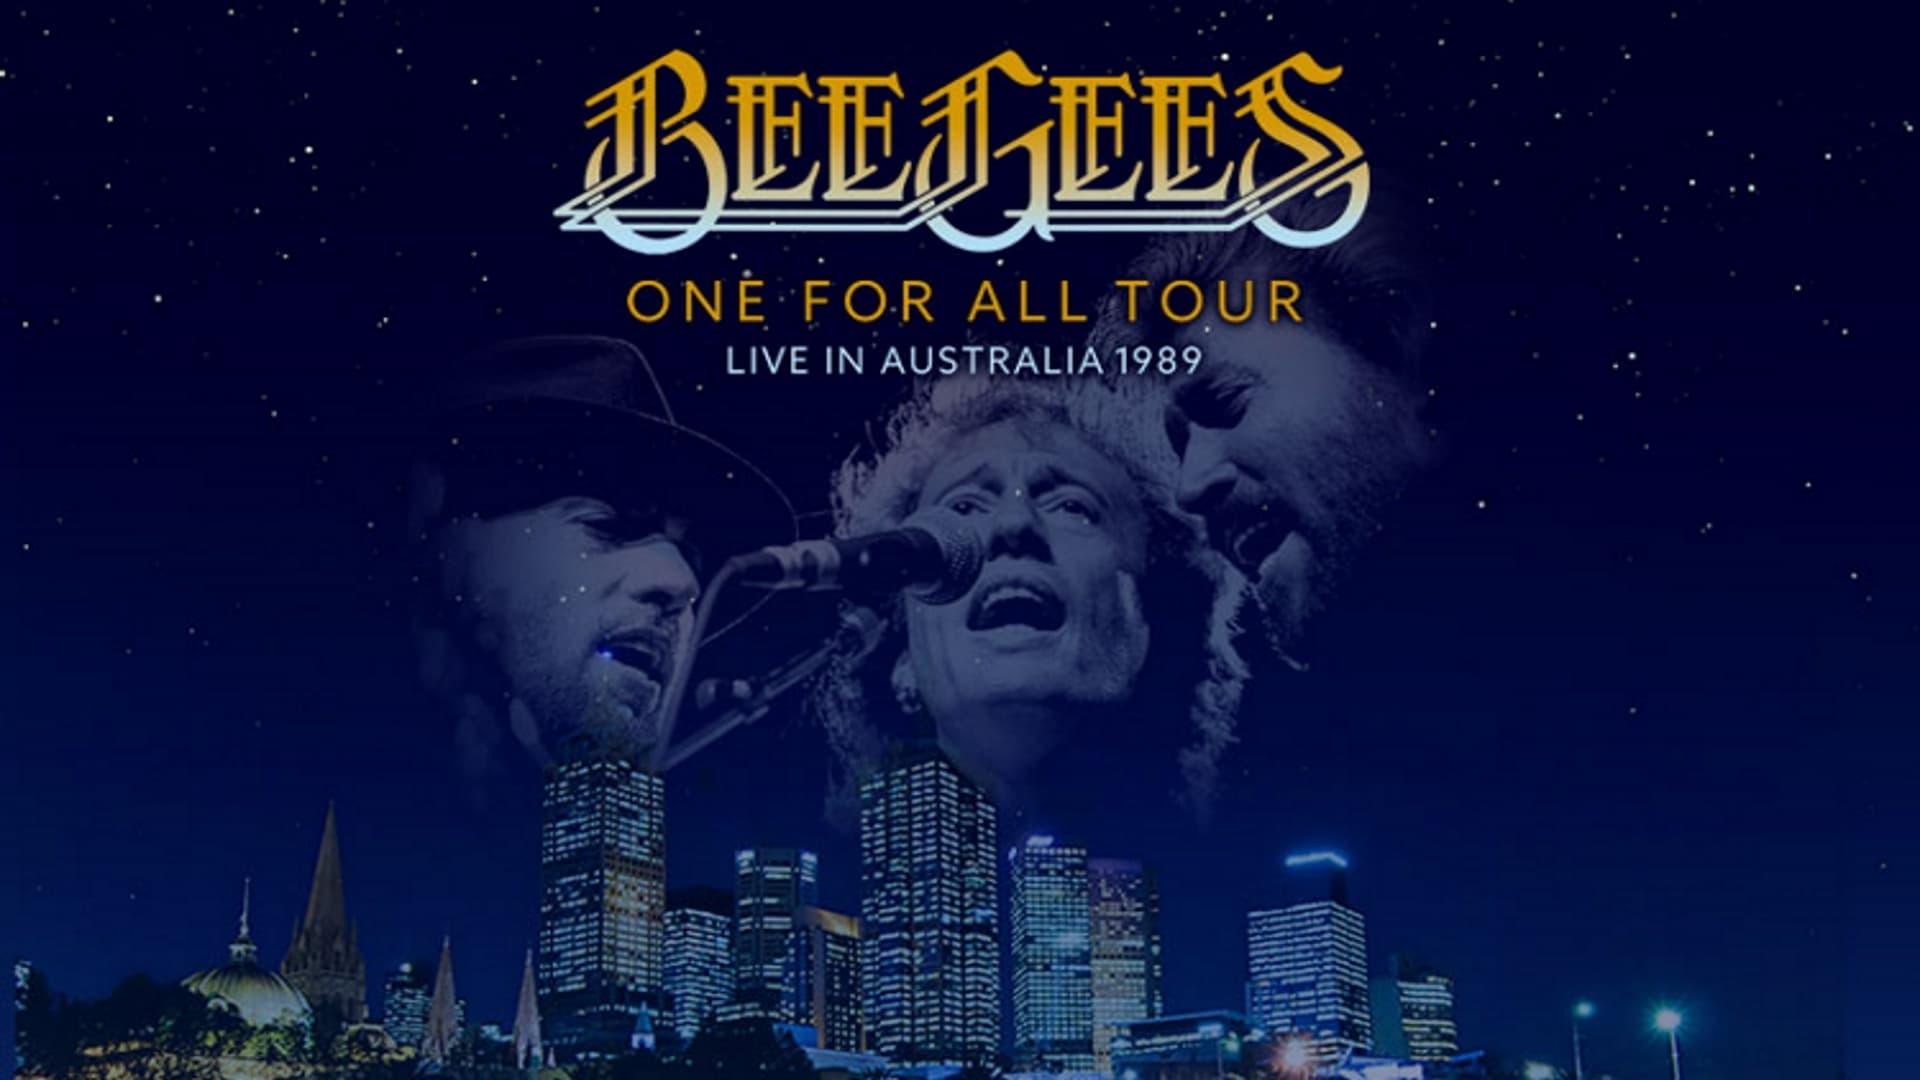 Bee Gees: One for All Tour - Live in Australia 1989 backdrop